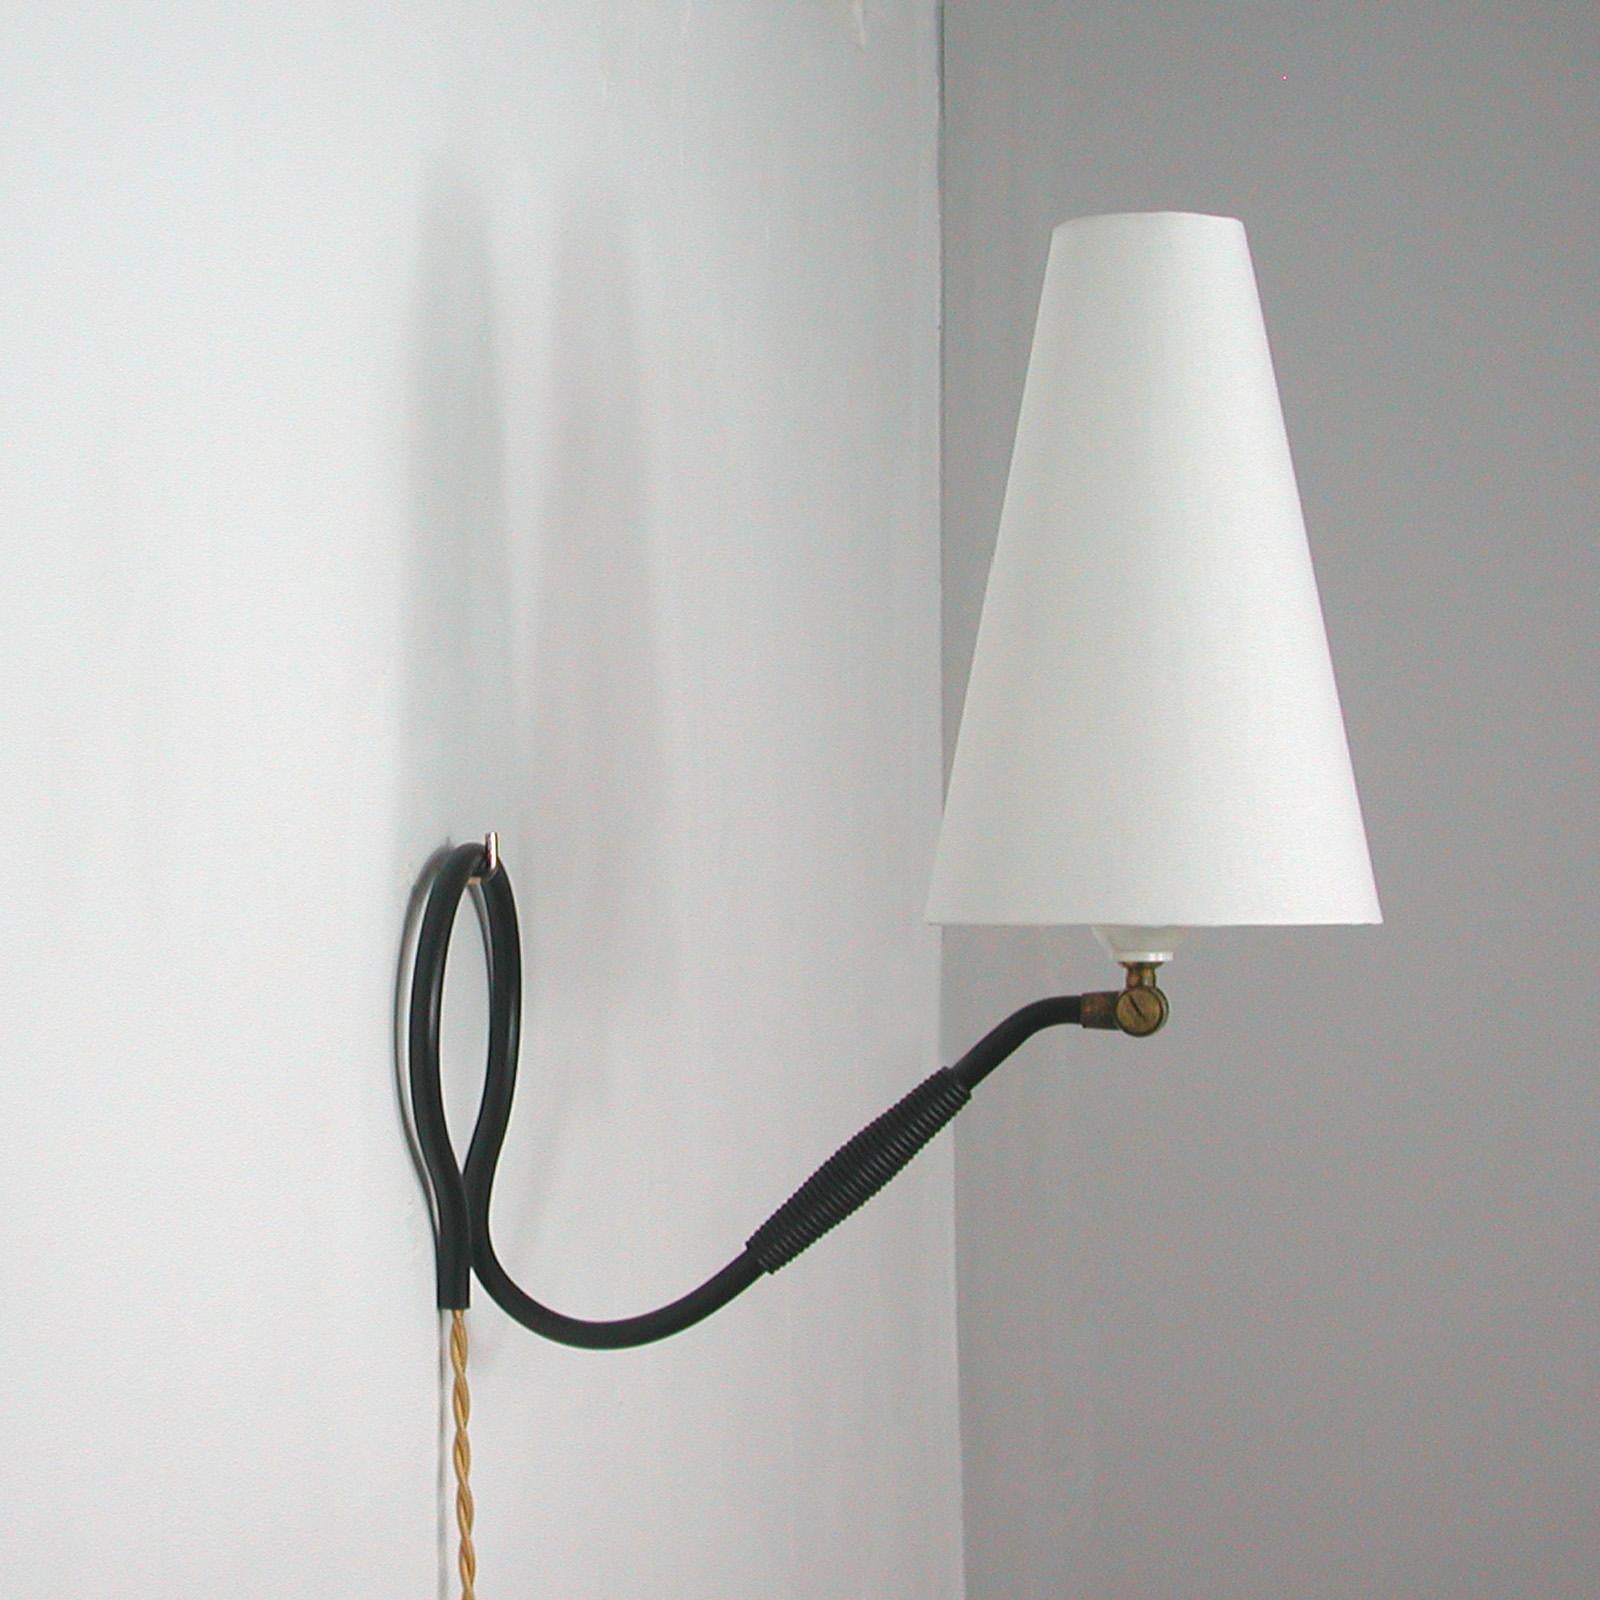 Danish Adjustable Black Brass and Bakelite Wall or Table Lamp 306 by Kaare Klint, 1950s For Sale